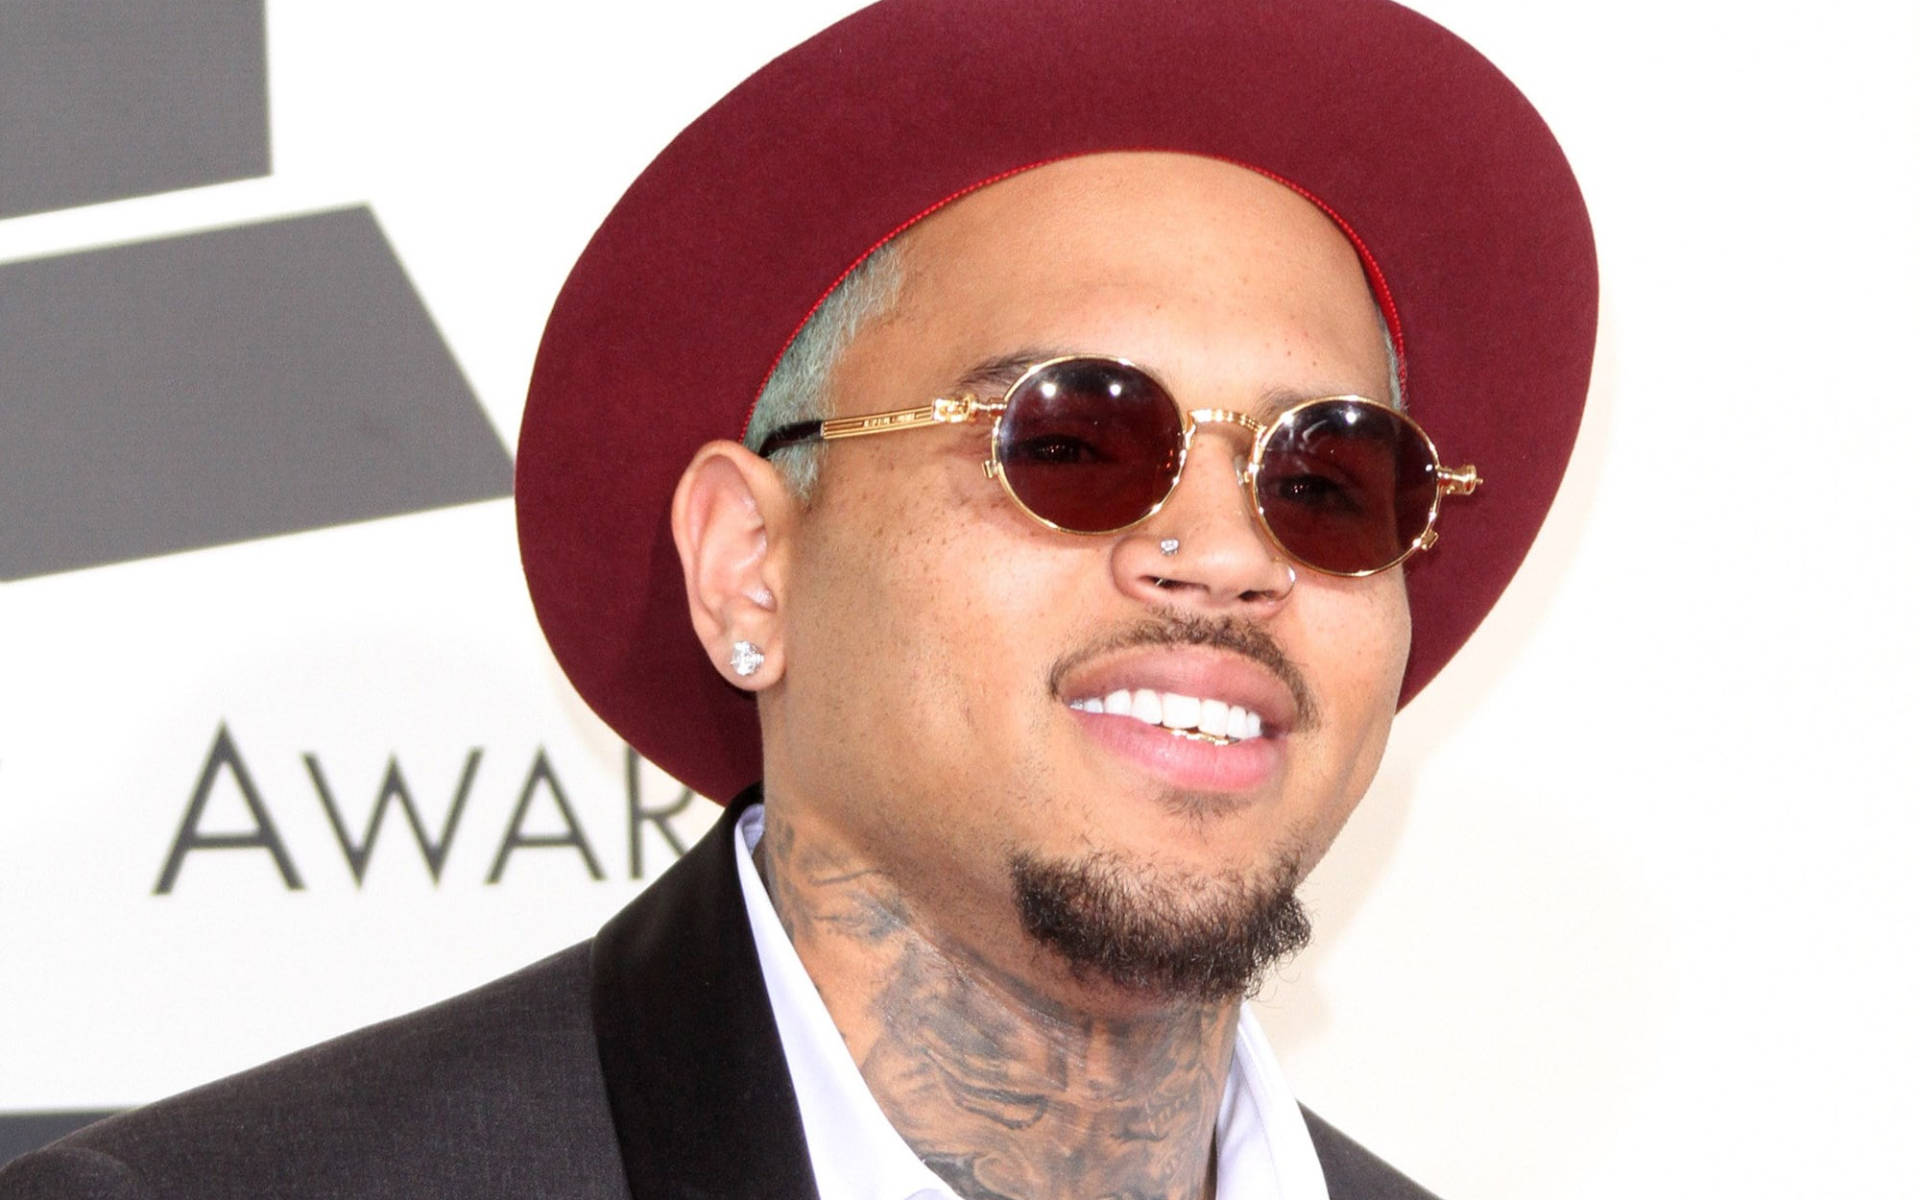 Chris Brown In Awards Event Background